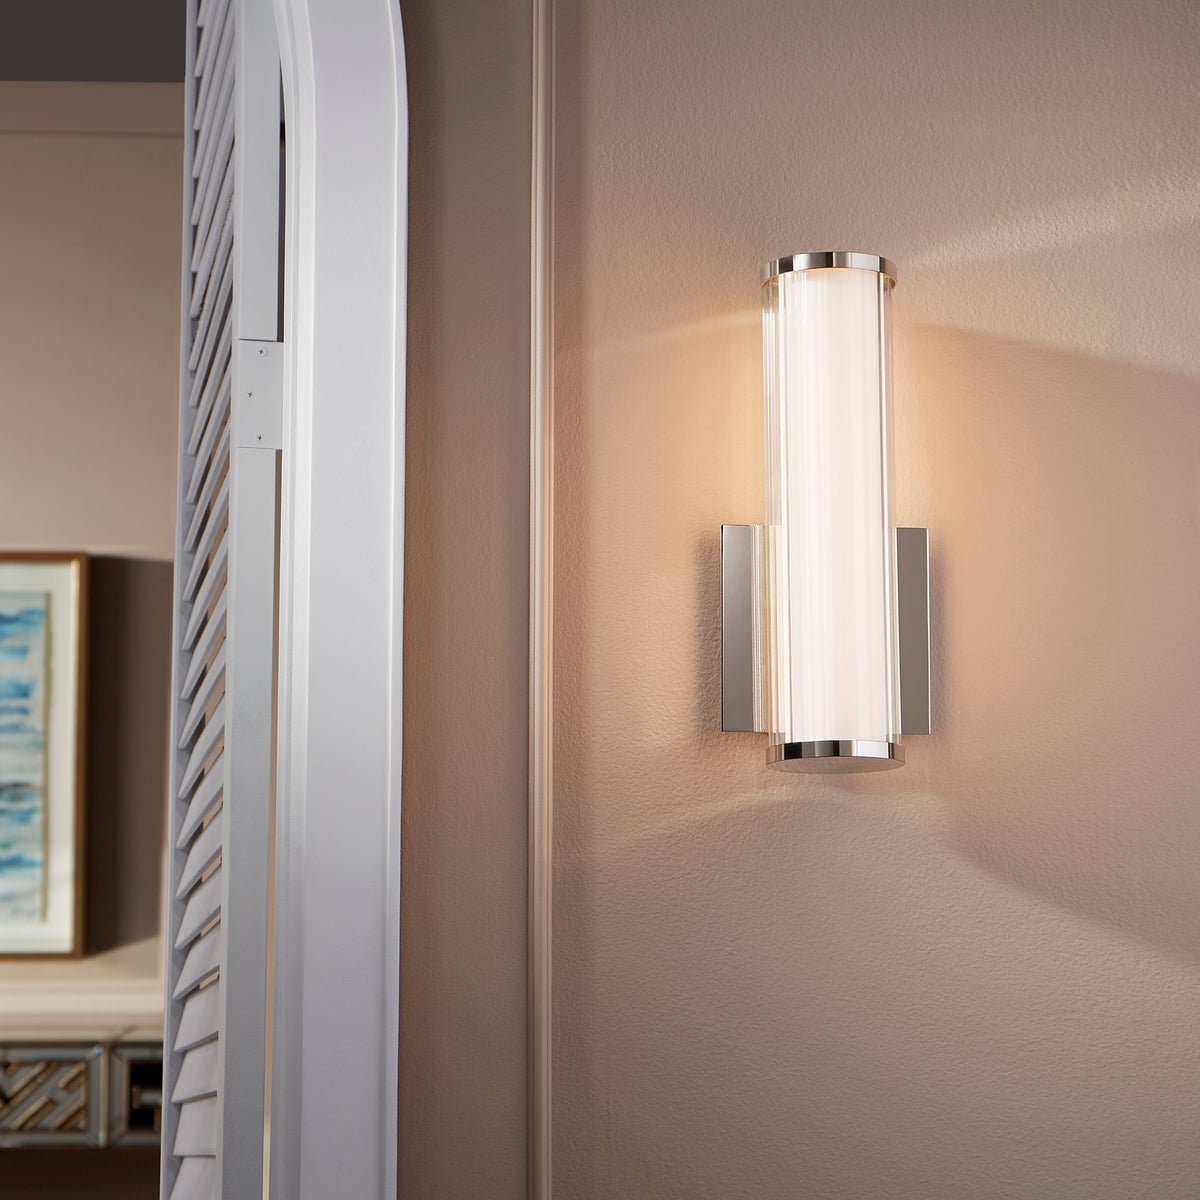 LED Wall Sconce with clean lines and subtle sophistication, perfect for modern applications. 9W, 120V, 689 lumens, 3000K color temperature, dimmable. UL Listed, Damp Location safety rating. Noir, Oiled Bronze, Polished Nickel, Satin Nickel finishes. 5.13"W x 12.5"H x 4"E. 2-year warranty.